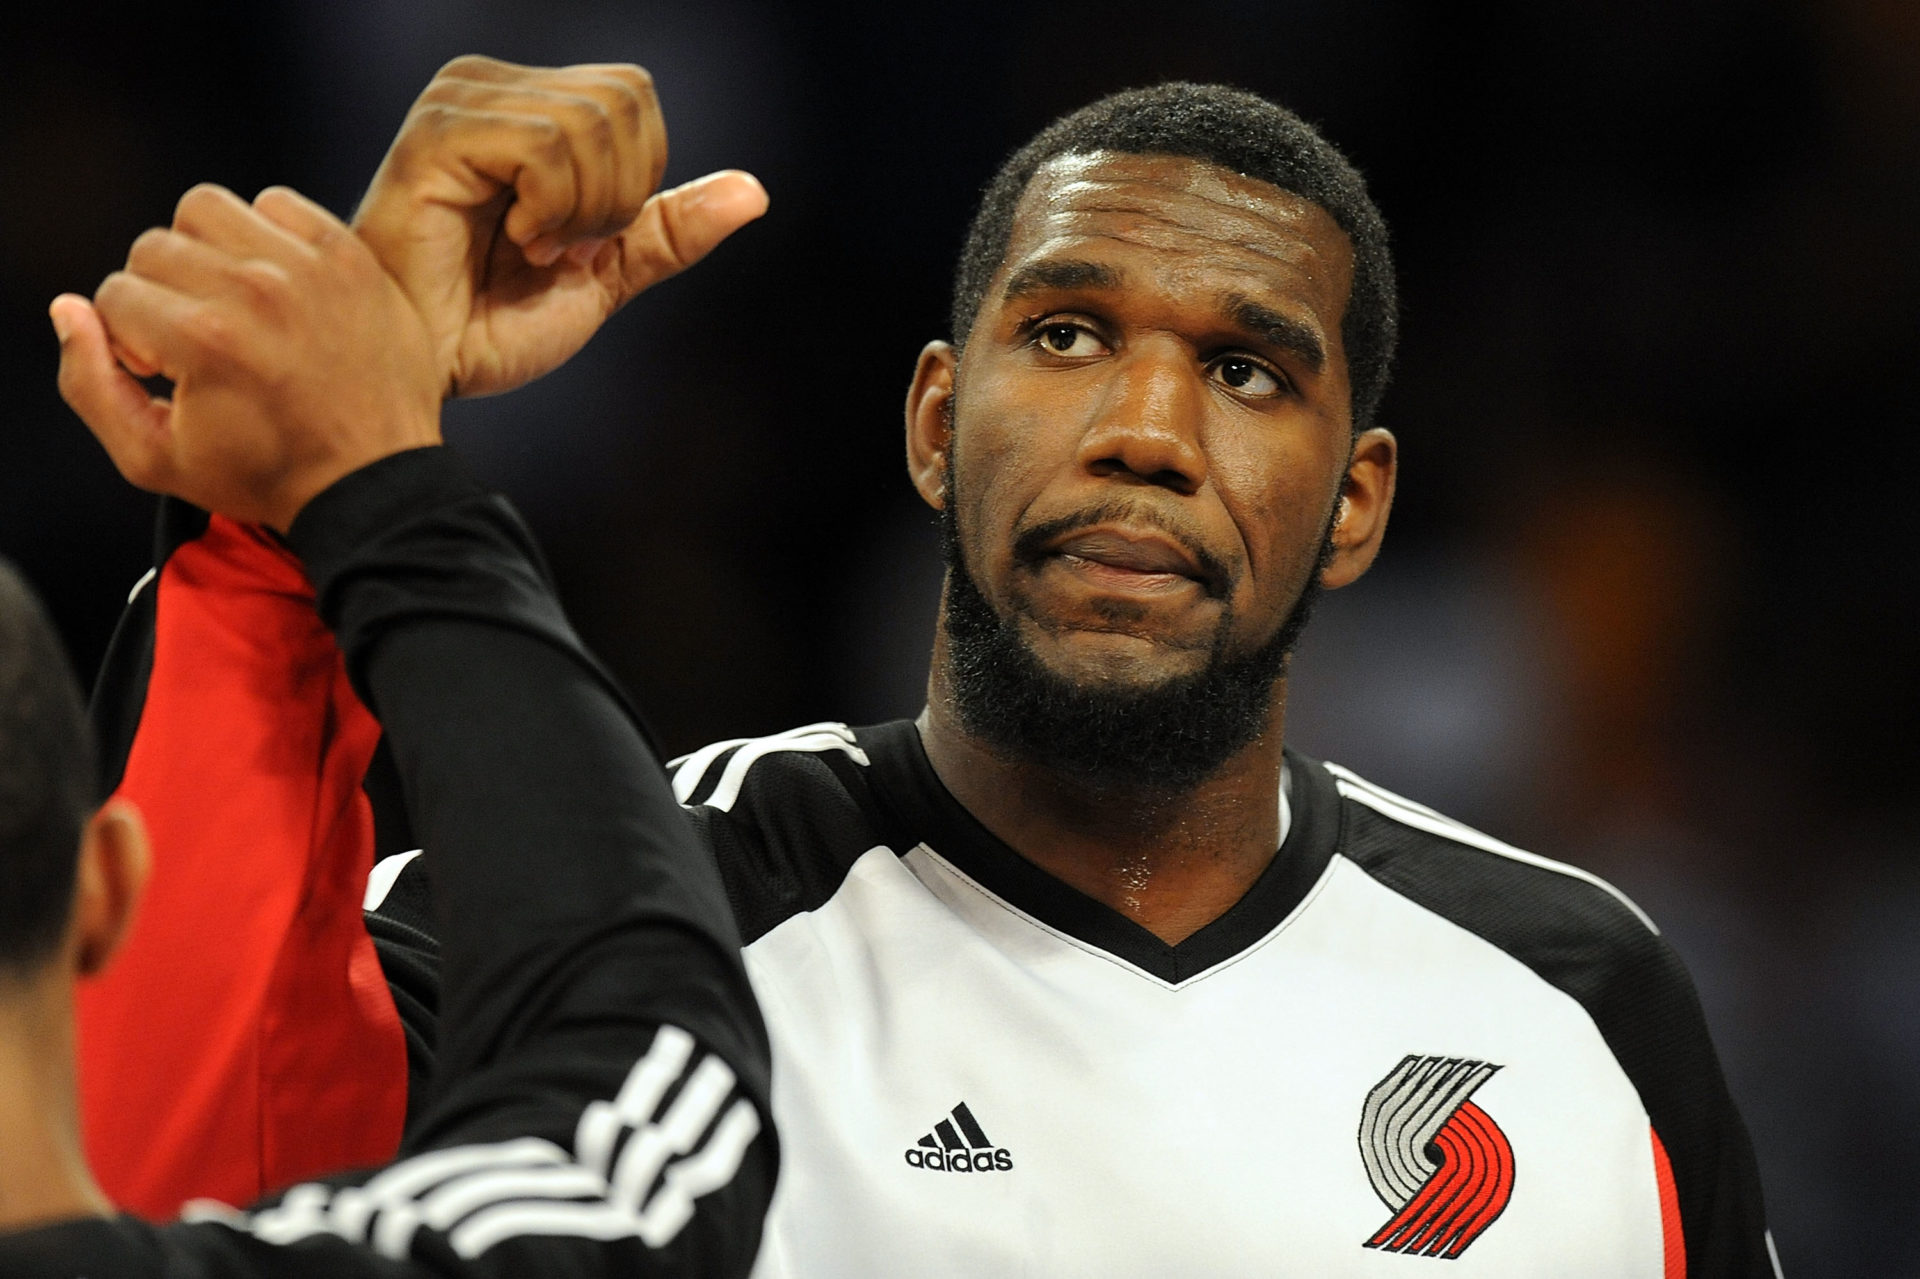 What happened to former NBA star Greg Oden and where is he now?